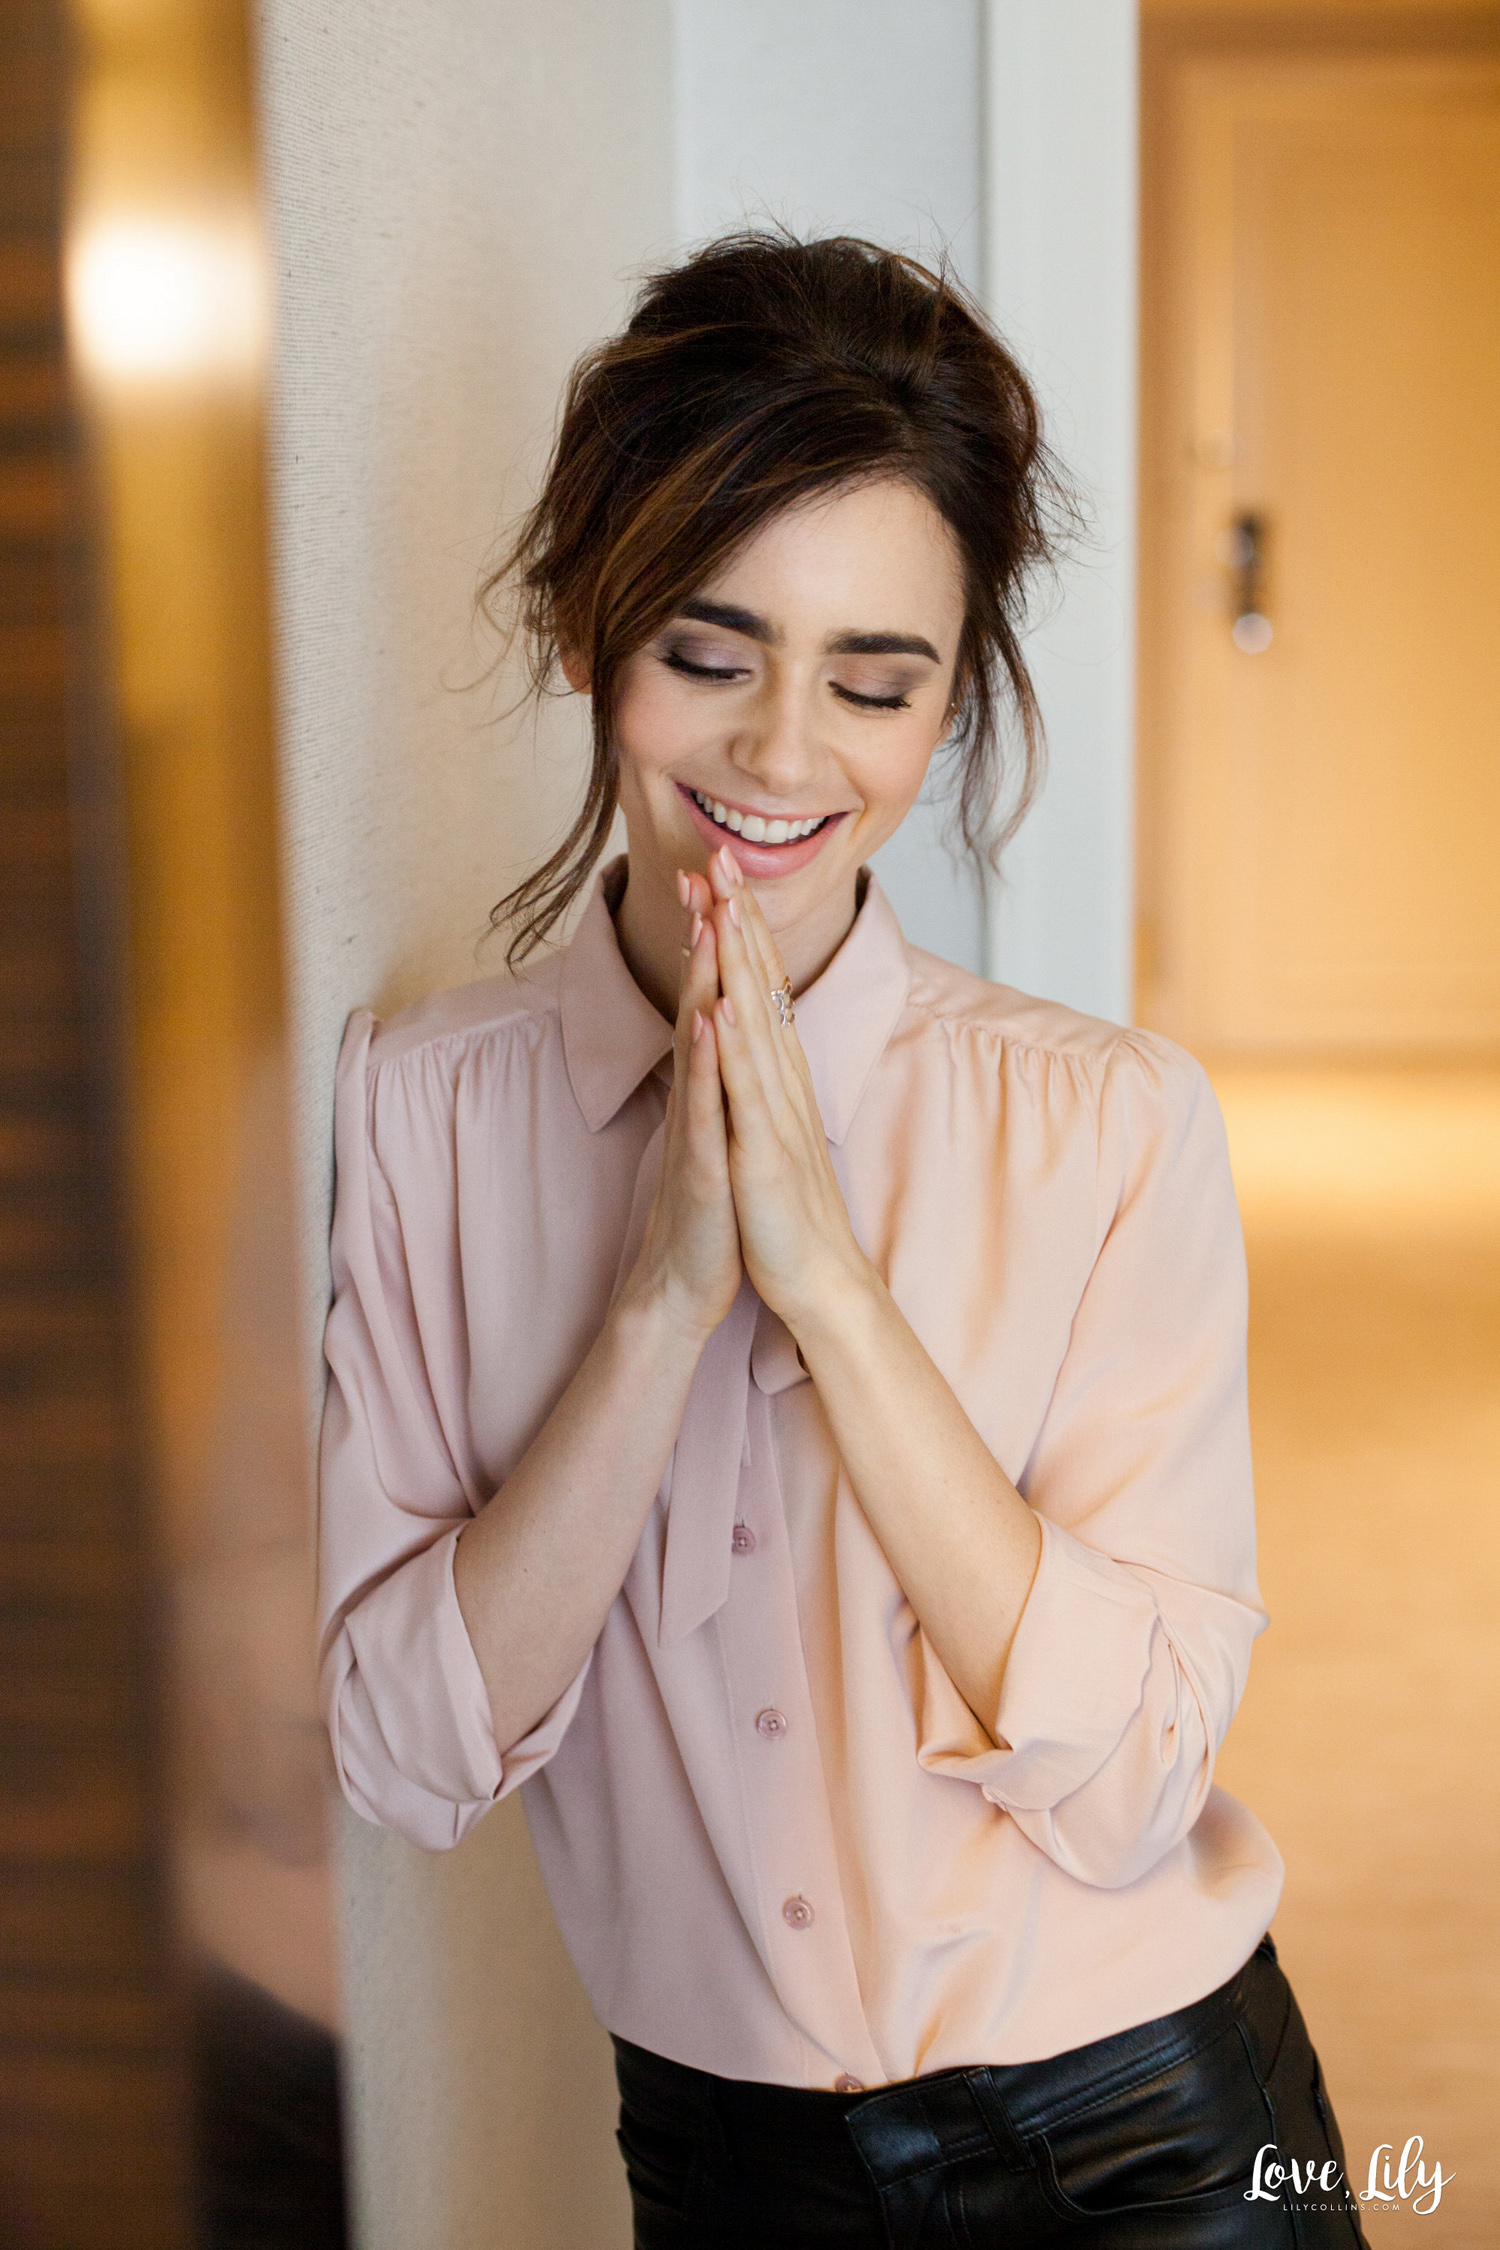 People 1500x2250 Lily Collins women actress model brunette short hair women indoors smiling pink shirt portrait display simple background watermarked